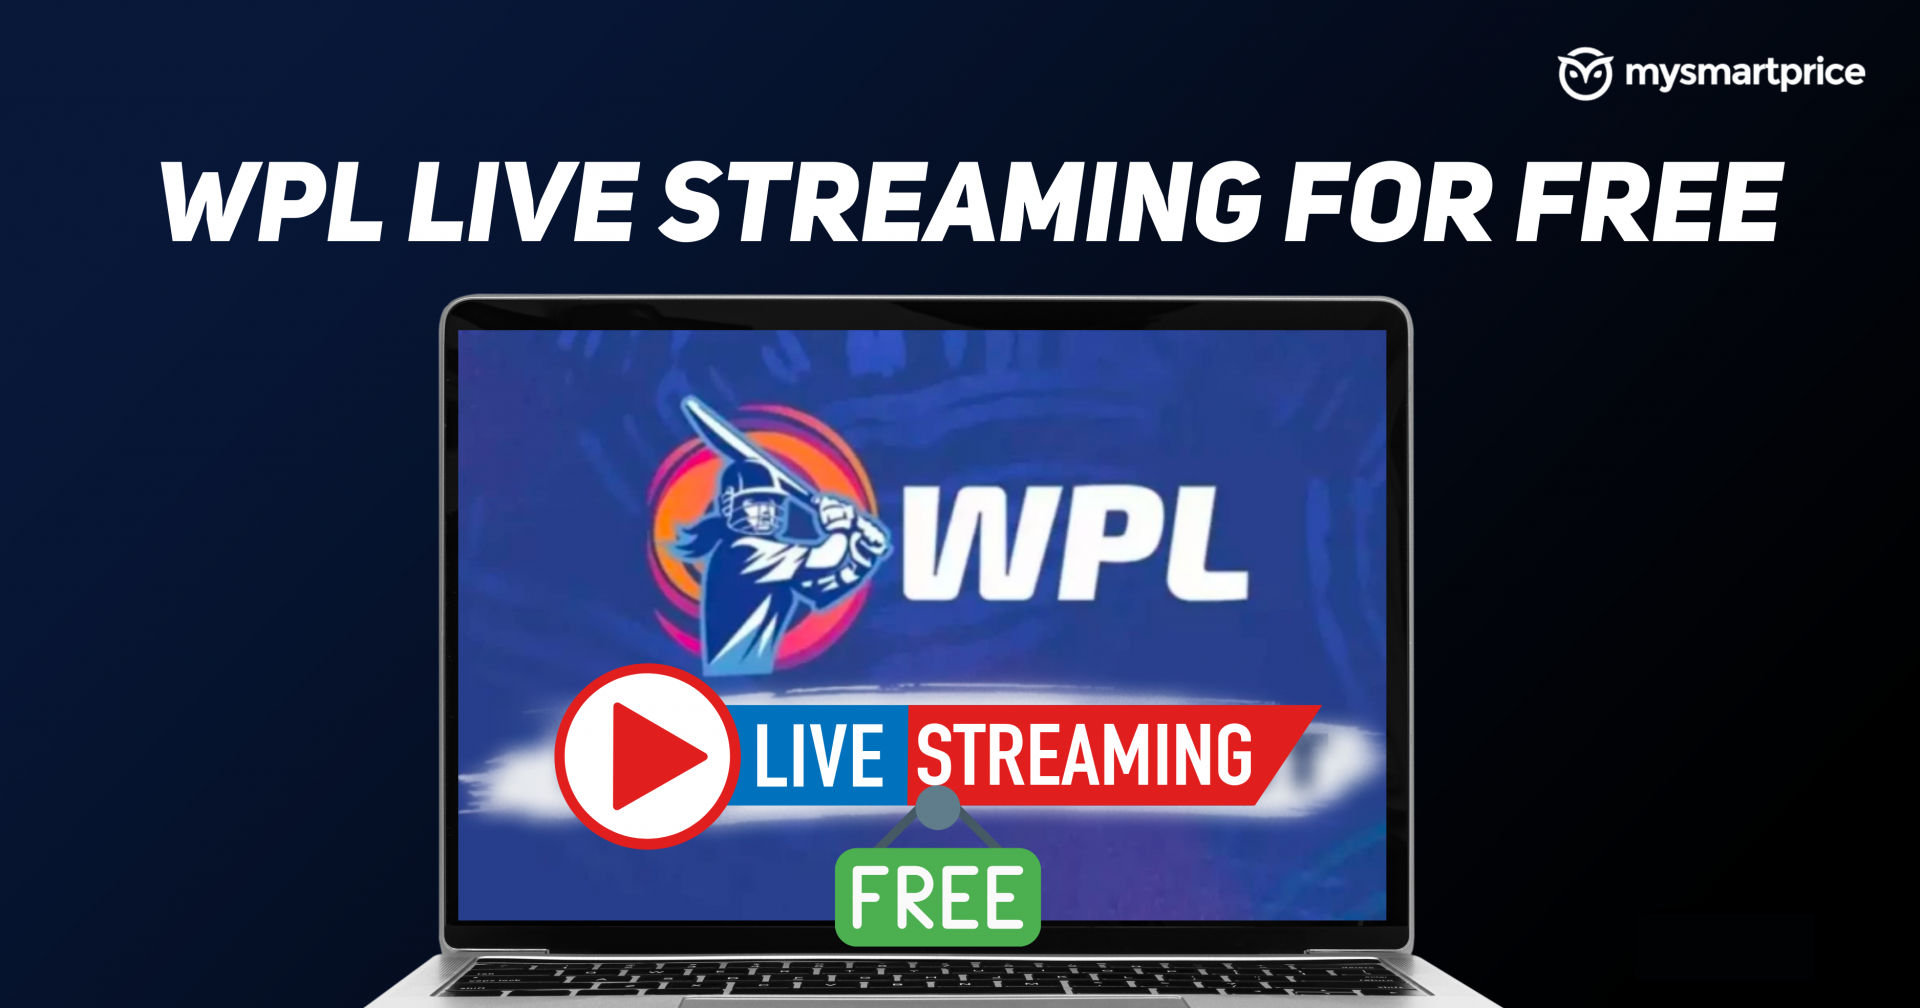 WPL 2023 Live Streaming FREE on Jio Cinema How to Watch Delhi Capitals